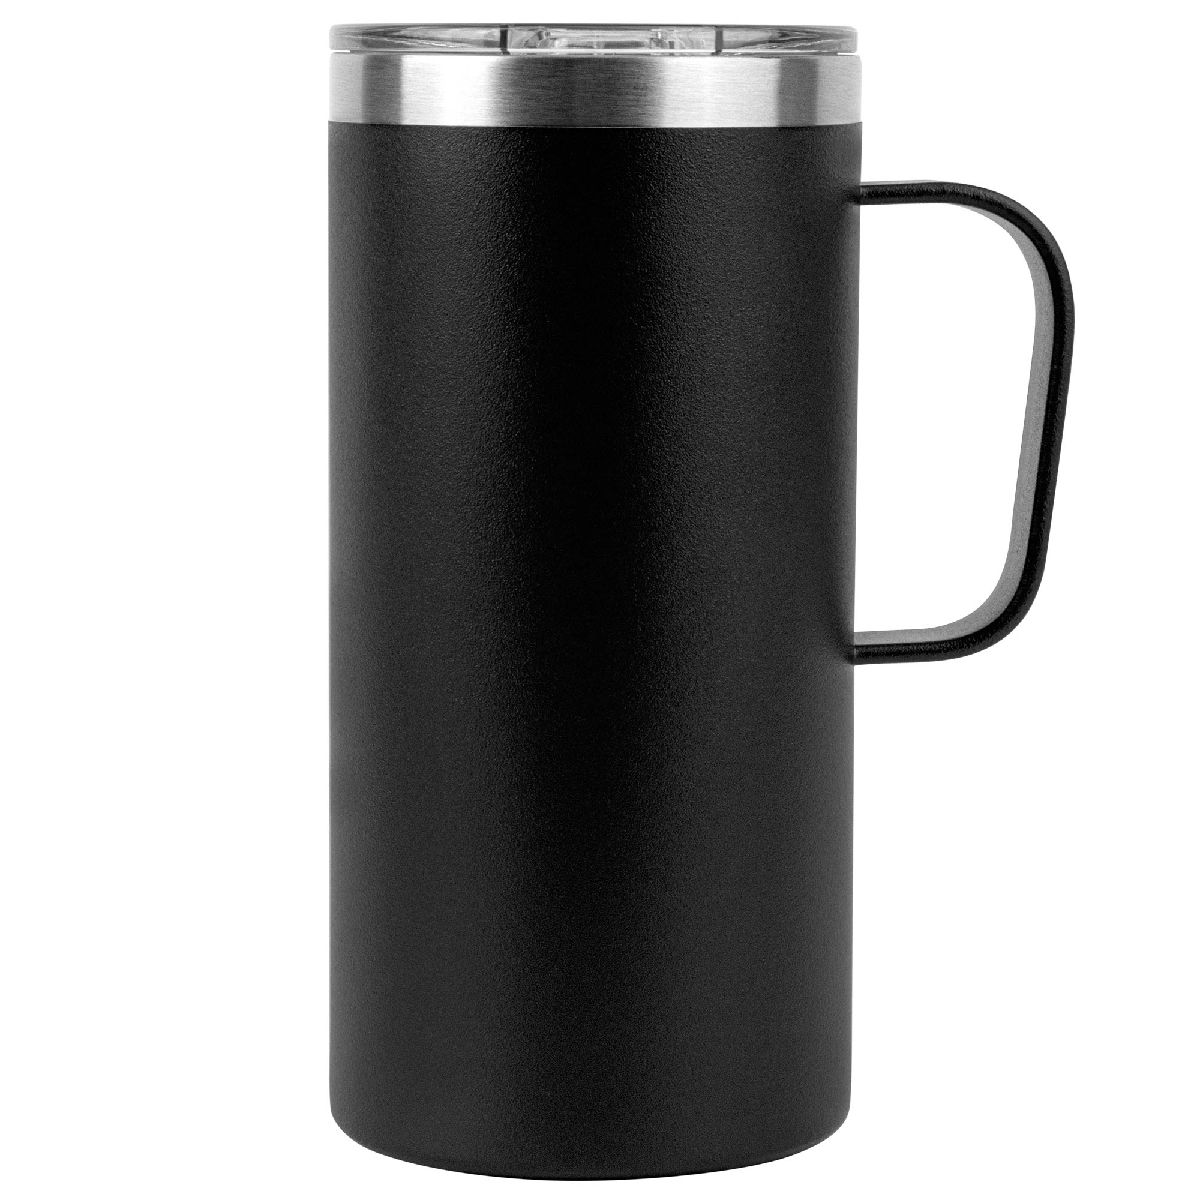 Black Embark Vacuum Insulated Tall Mug With Spill-Proof Clear Sip-Lid